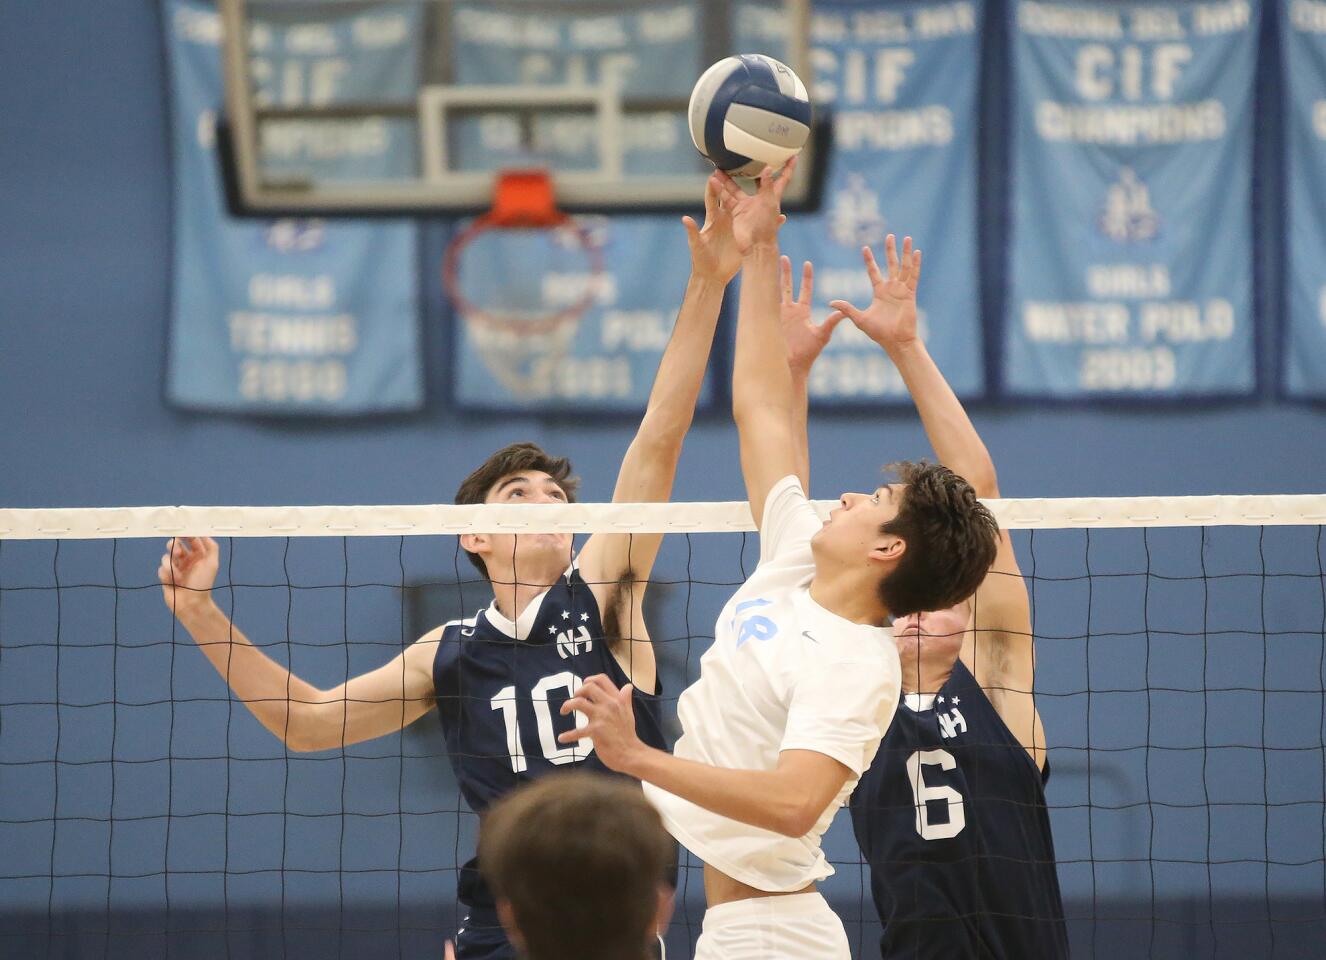 Newport Harbor's Caden Garrido (10) and Blake Ludes (6) battle for a tip with Corona Del Mar's Bryce Dvorak during second round of the Battle of the Bay boys' volleyball match in Surf League play on Wednesday.